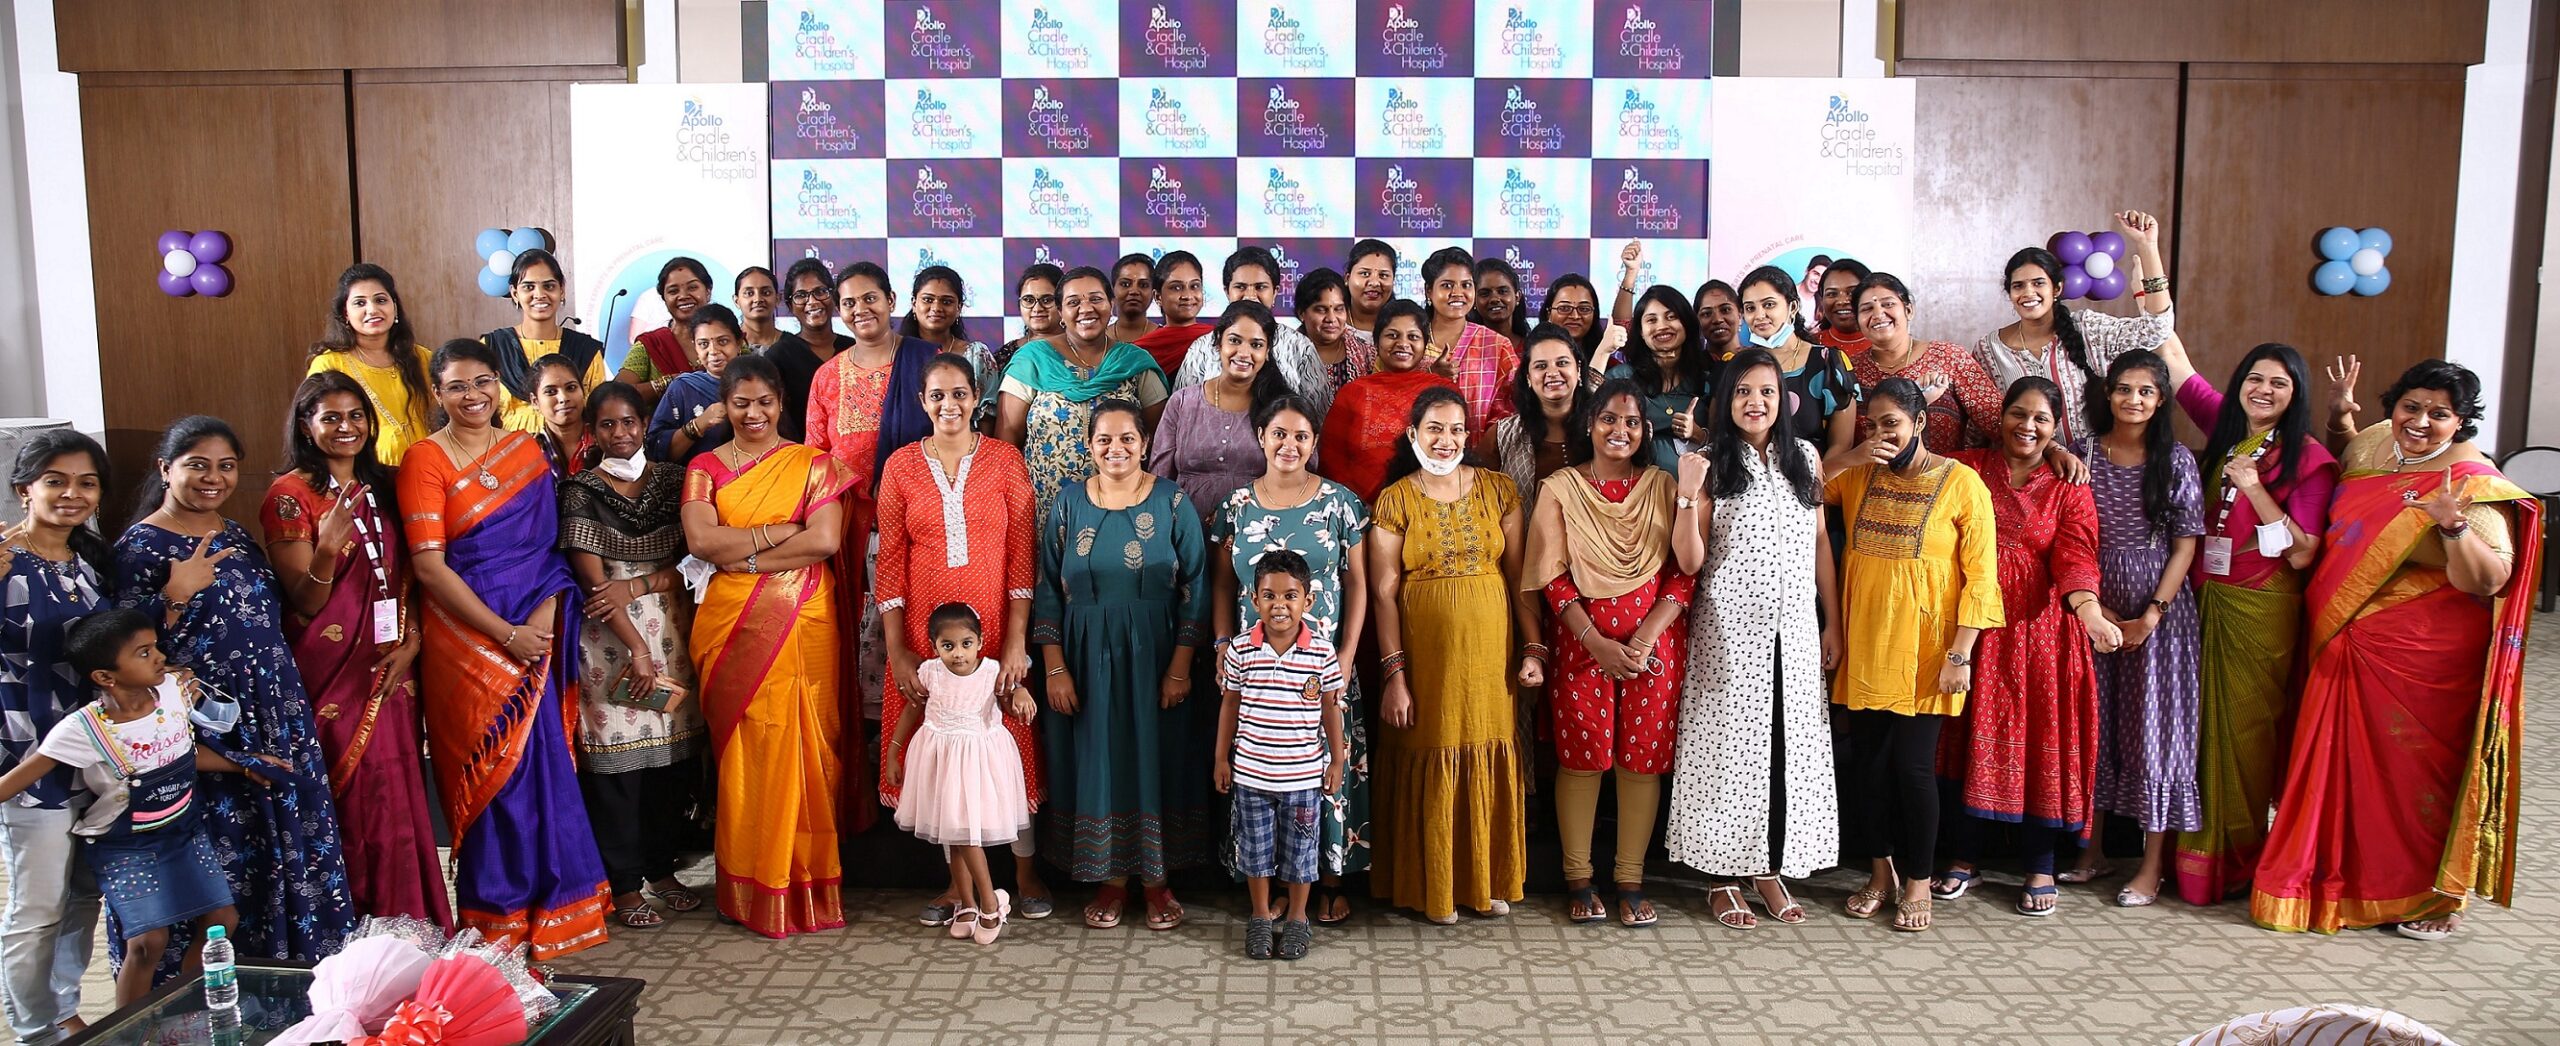 Apollo Cradle and Children's Hospital, Karapakkam organised a